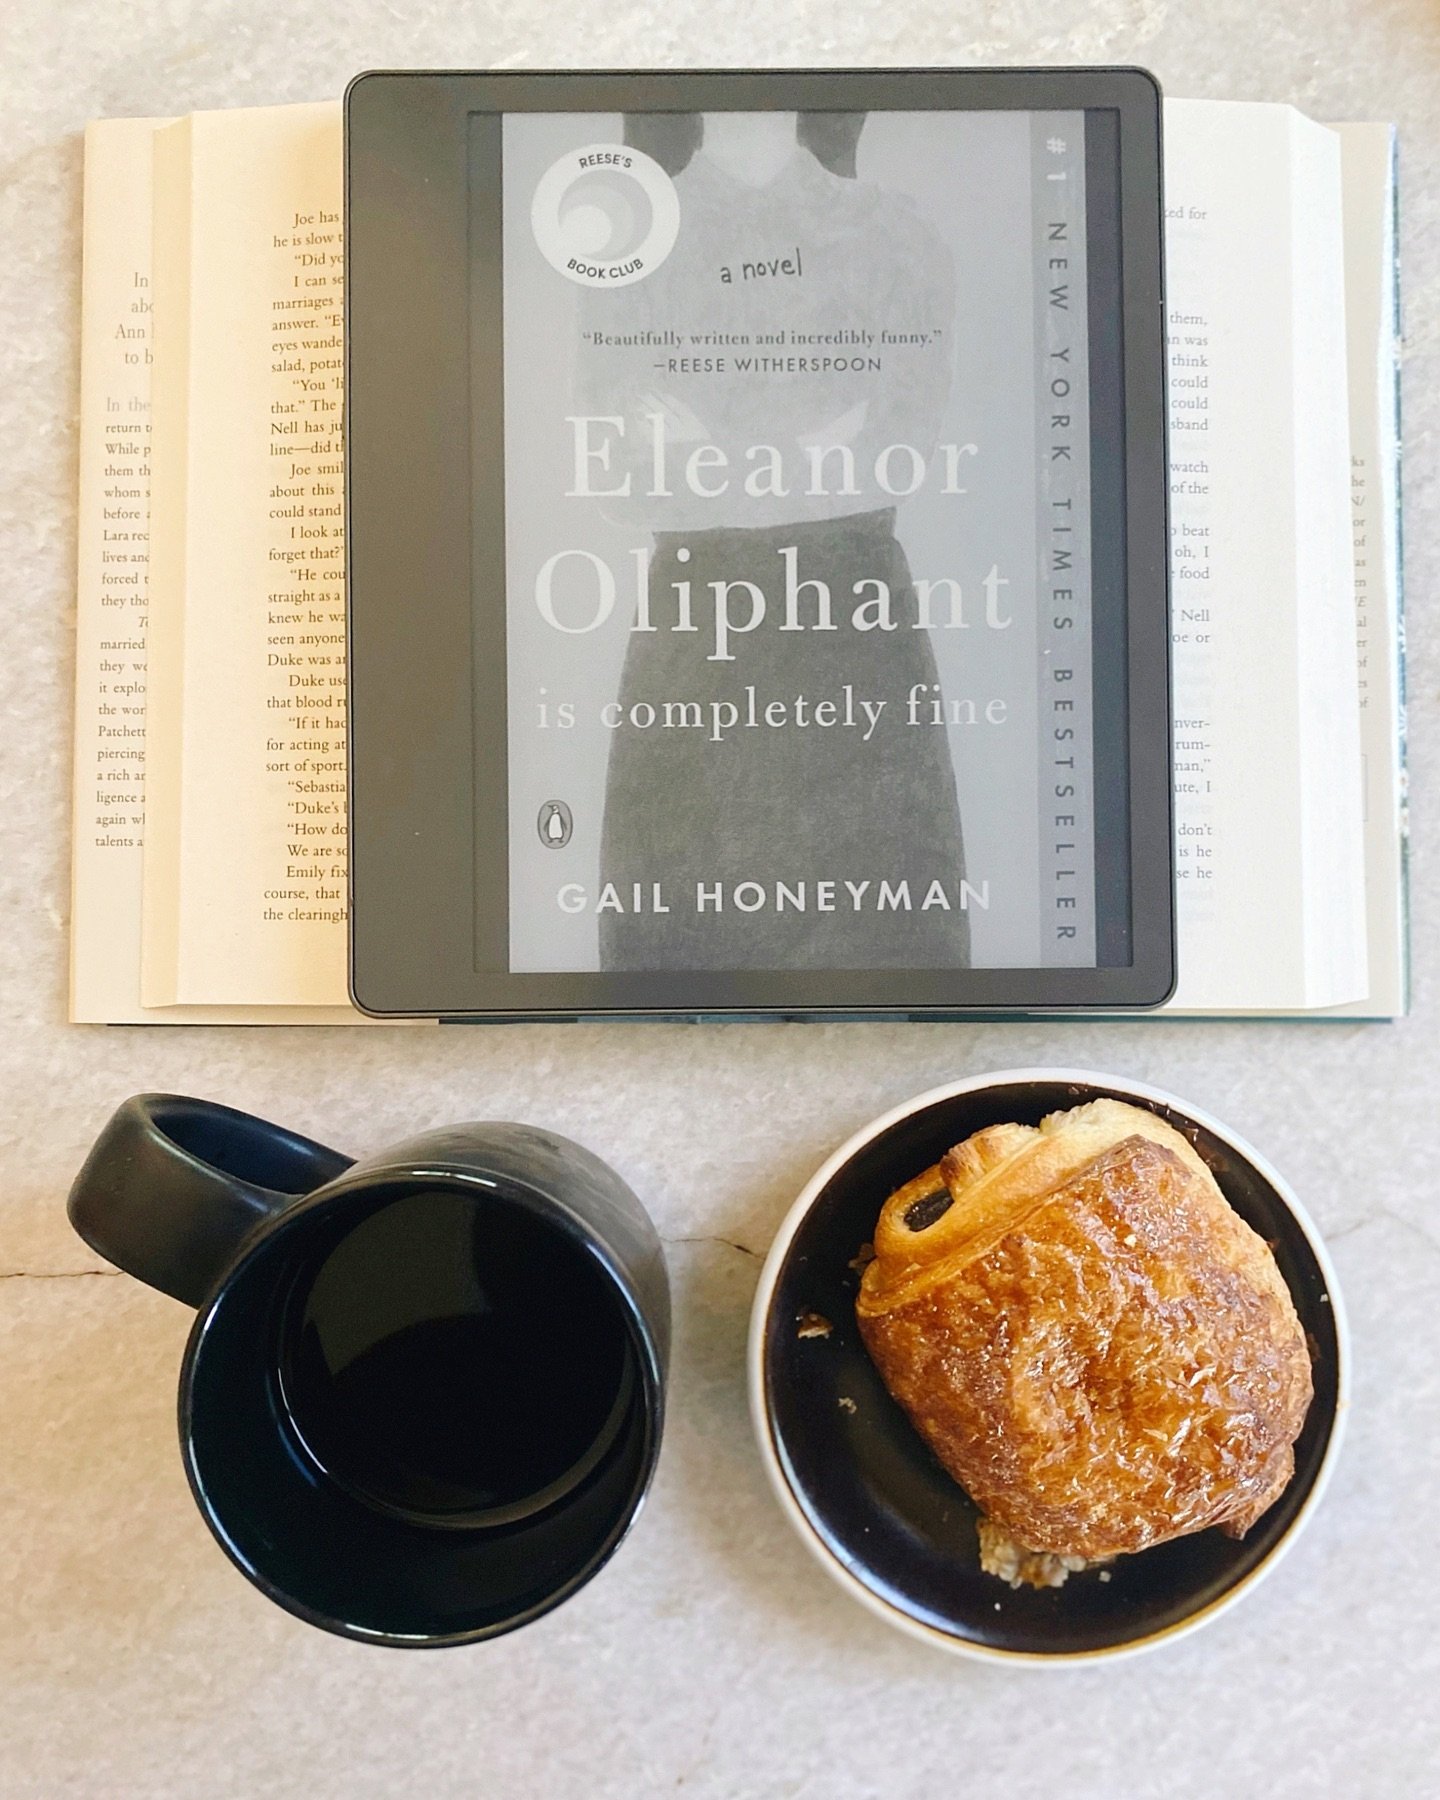 Coffee &amp; currently reading ☕️📖
Sippin on our new roast Katana from D.R. Congo and it is simply delicious! 
Brew method: French Press
Reading: Eleanor Oliphant is Completely Fine

What are you sippin on or reading these days?
&mdash;
#coffeeandbo